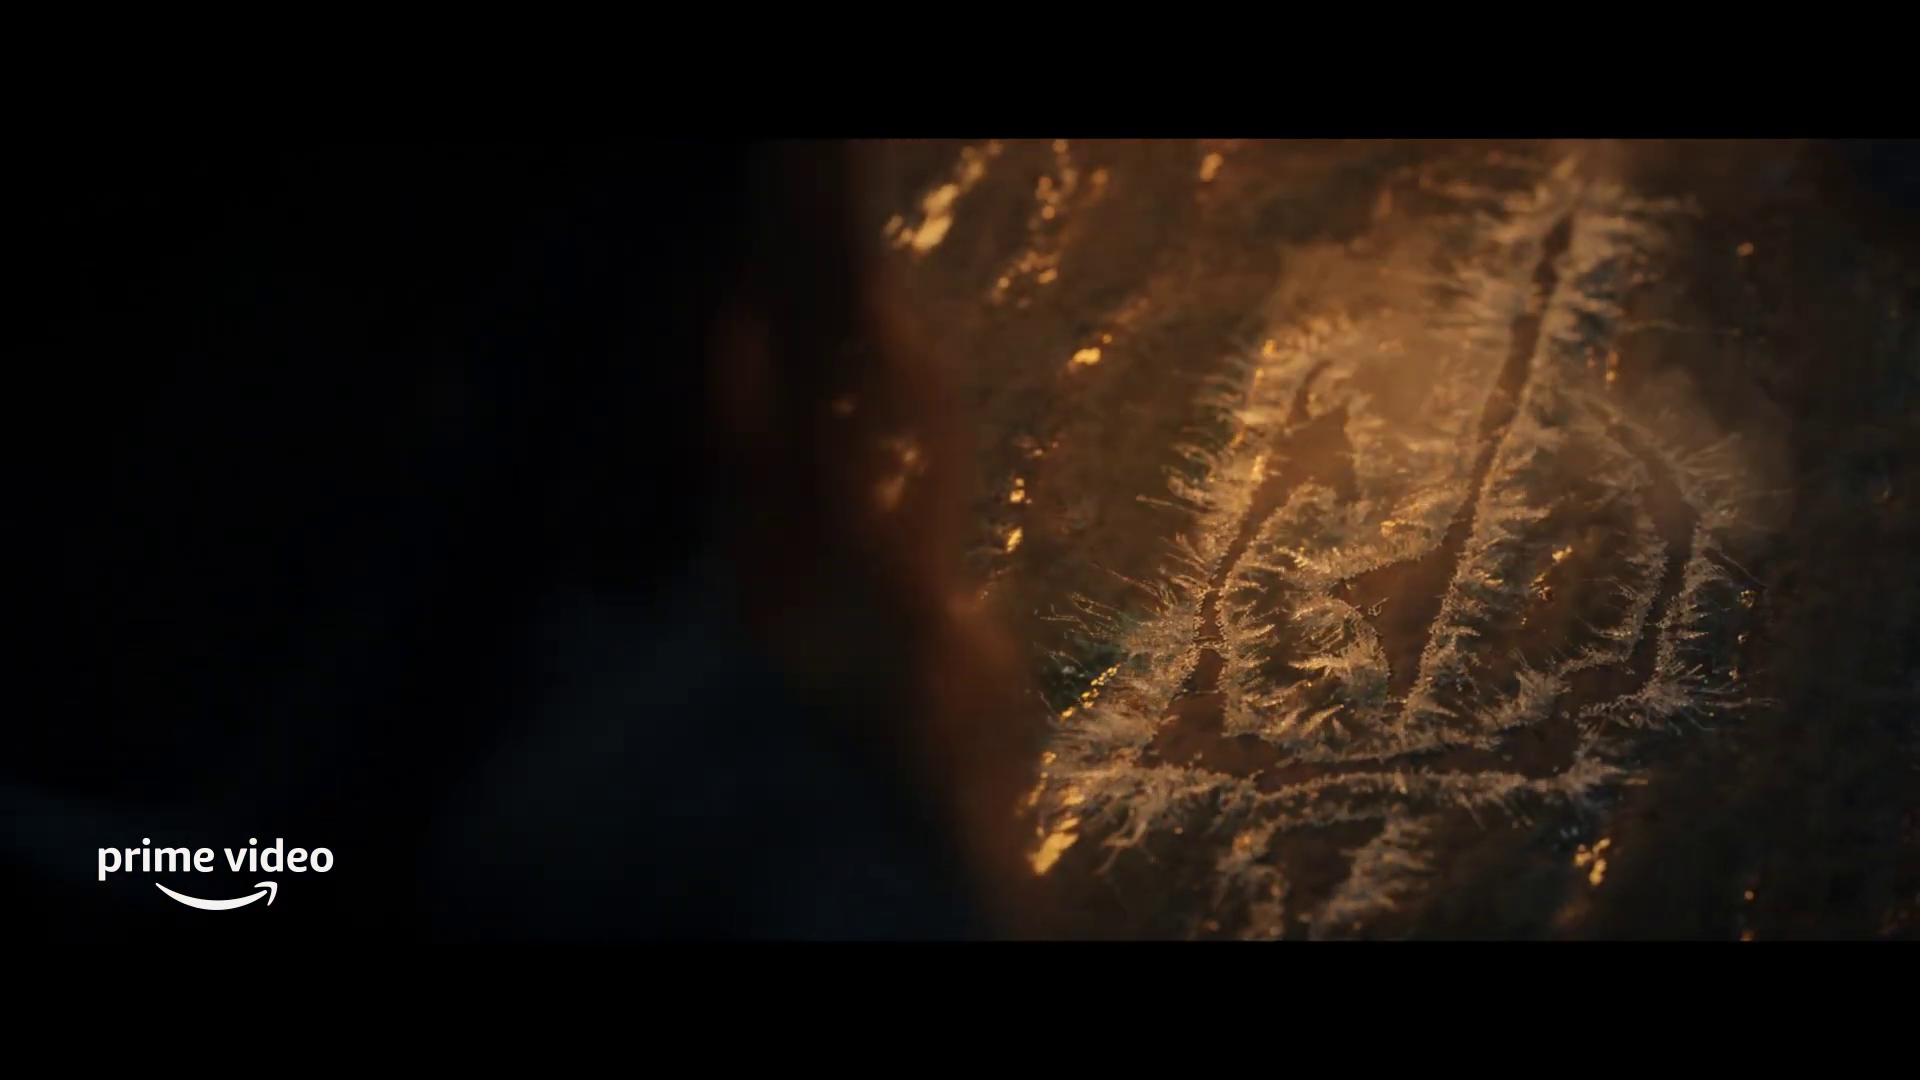 LOTR: The Rings of Power Trailer Subtly Sets Up Sauron's Arrival